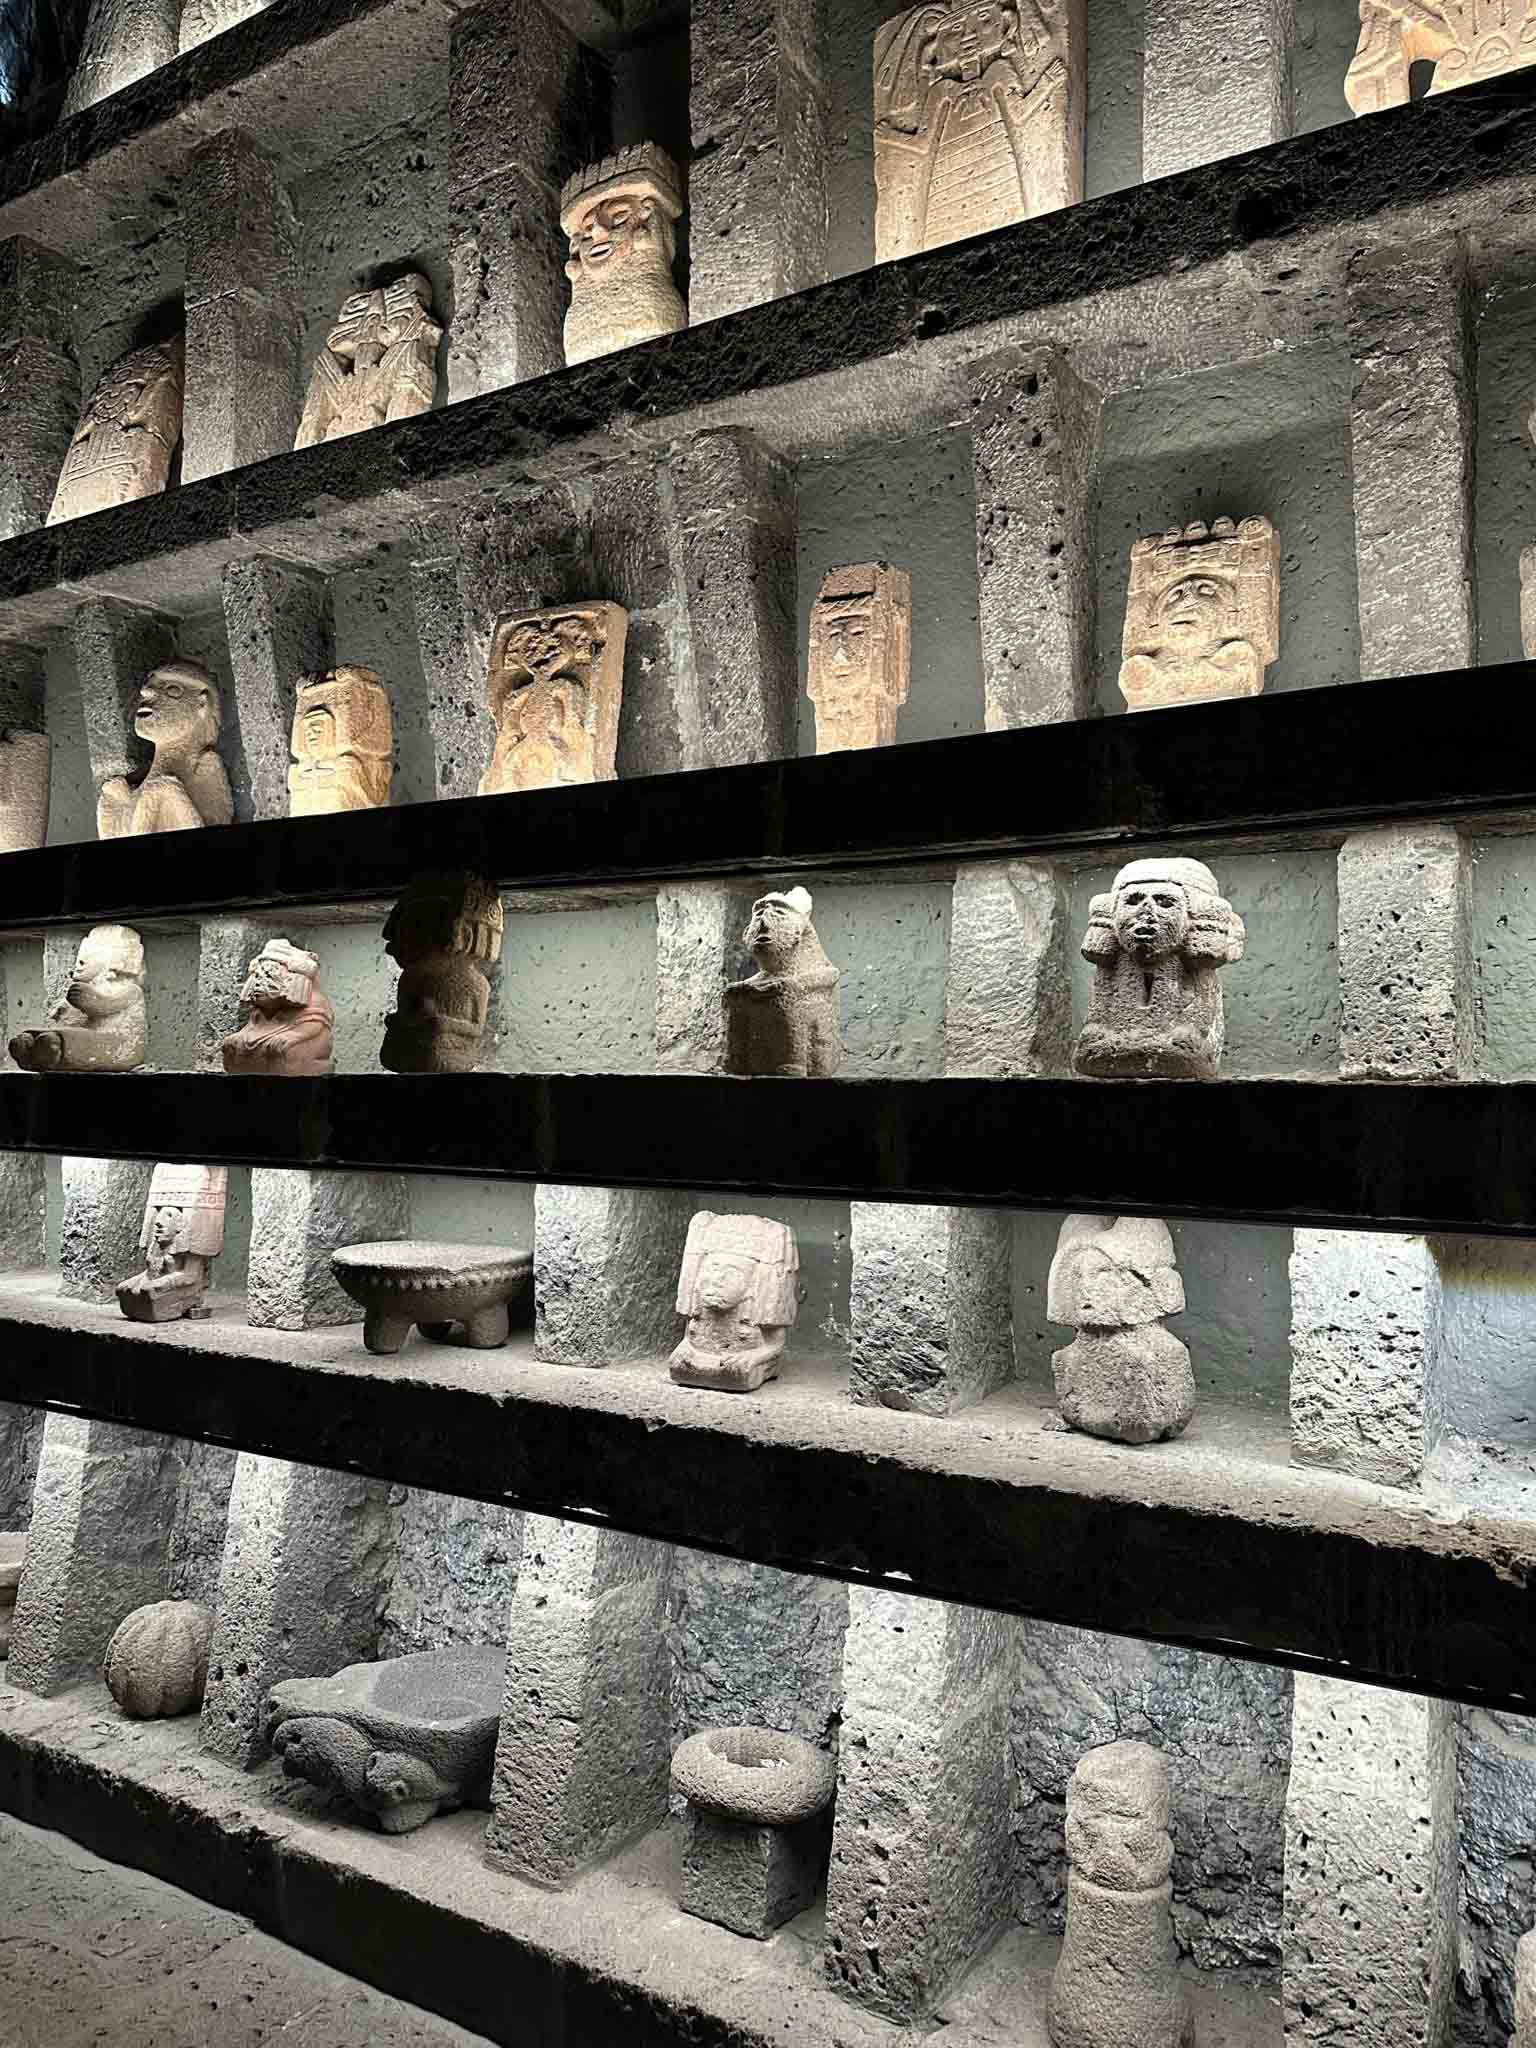 Pre-Hispanic artifacts and sculptures on display in the Museo Anahuacalli